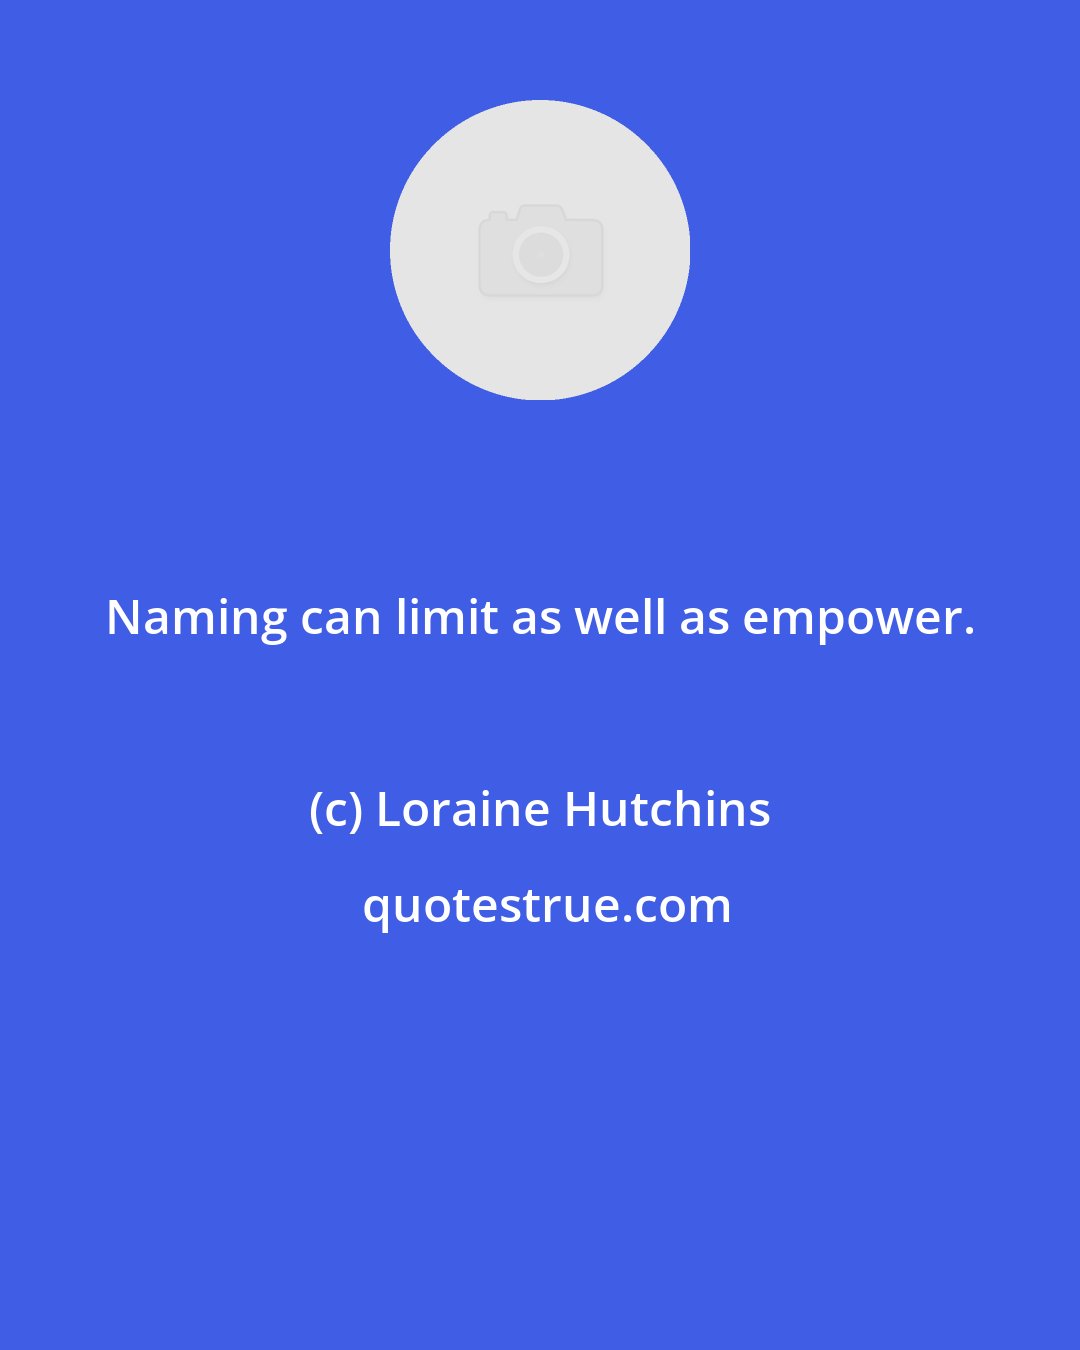 Loraine Hutchins: Naming can limit as well as empower.